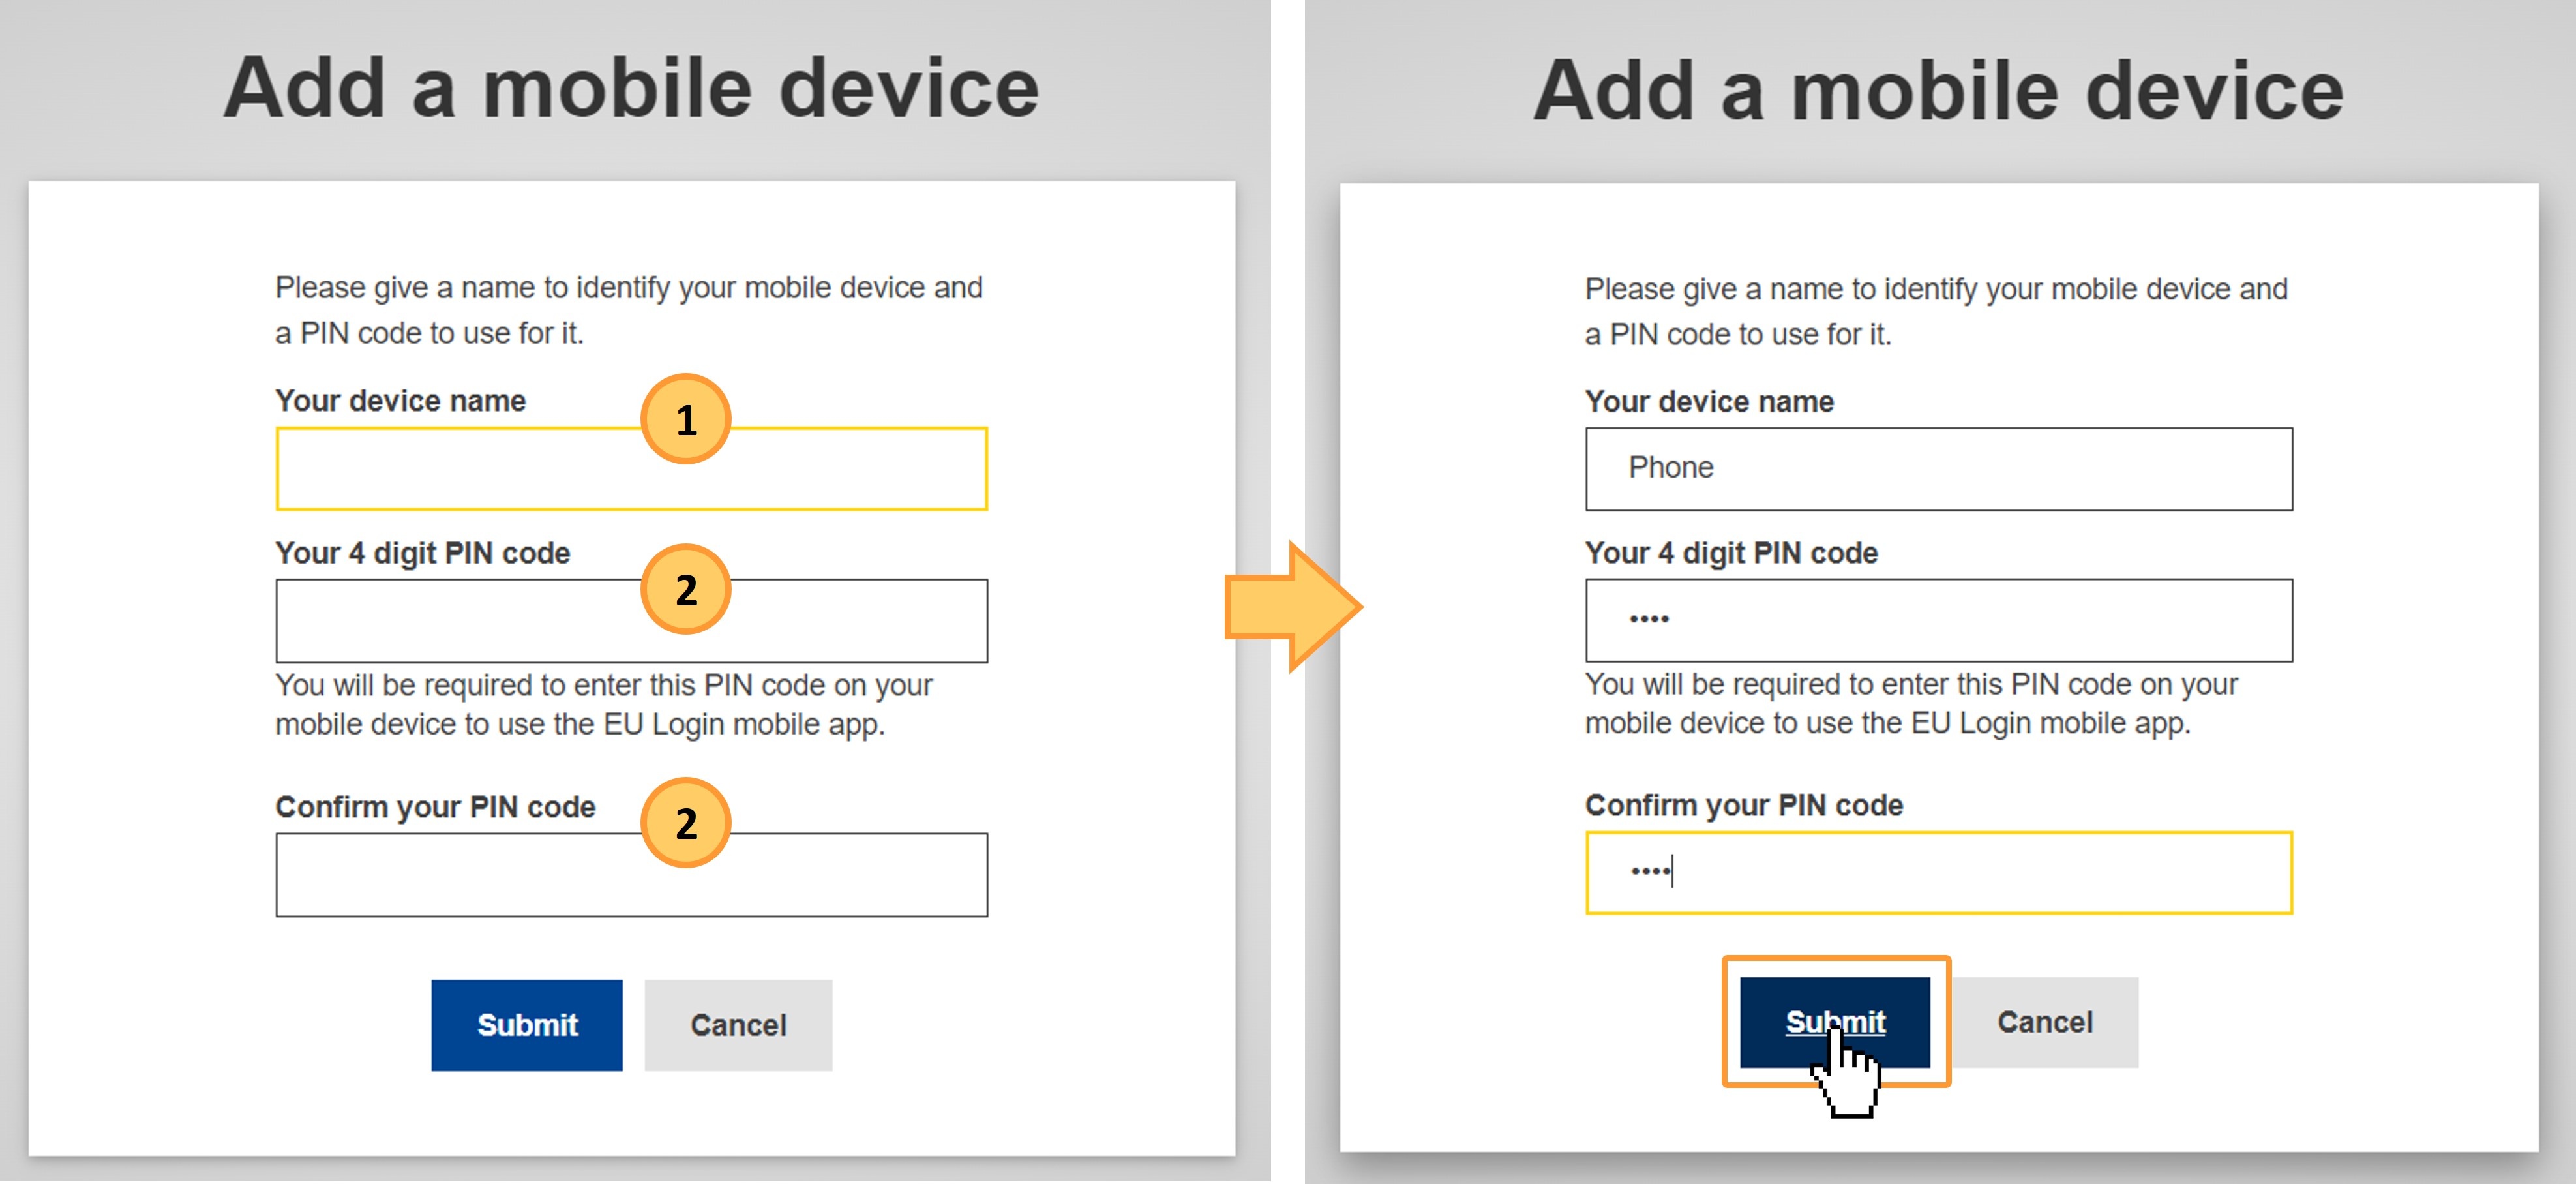 Fill in the required information in the Add a mobile device screen